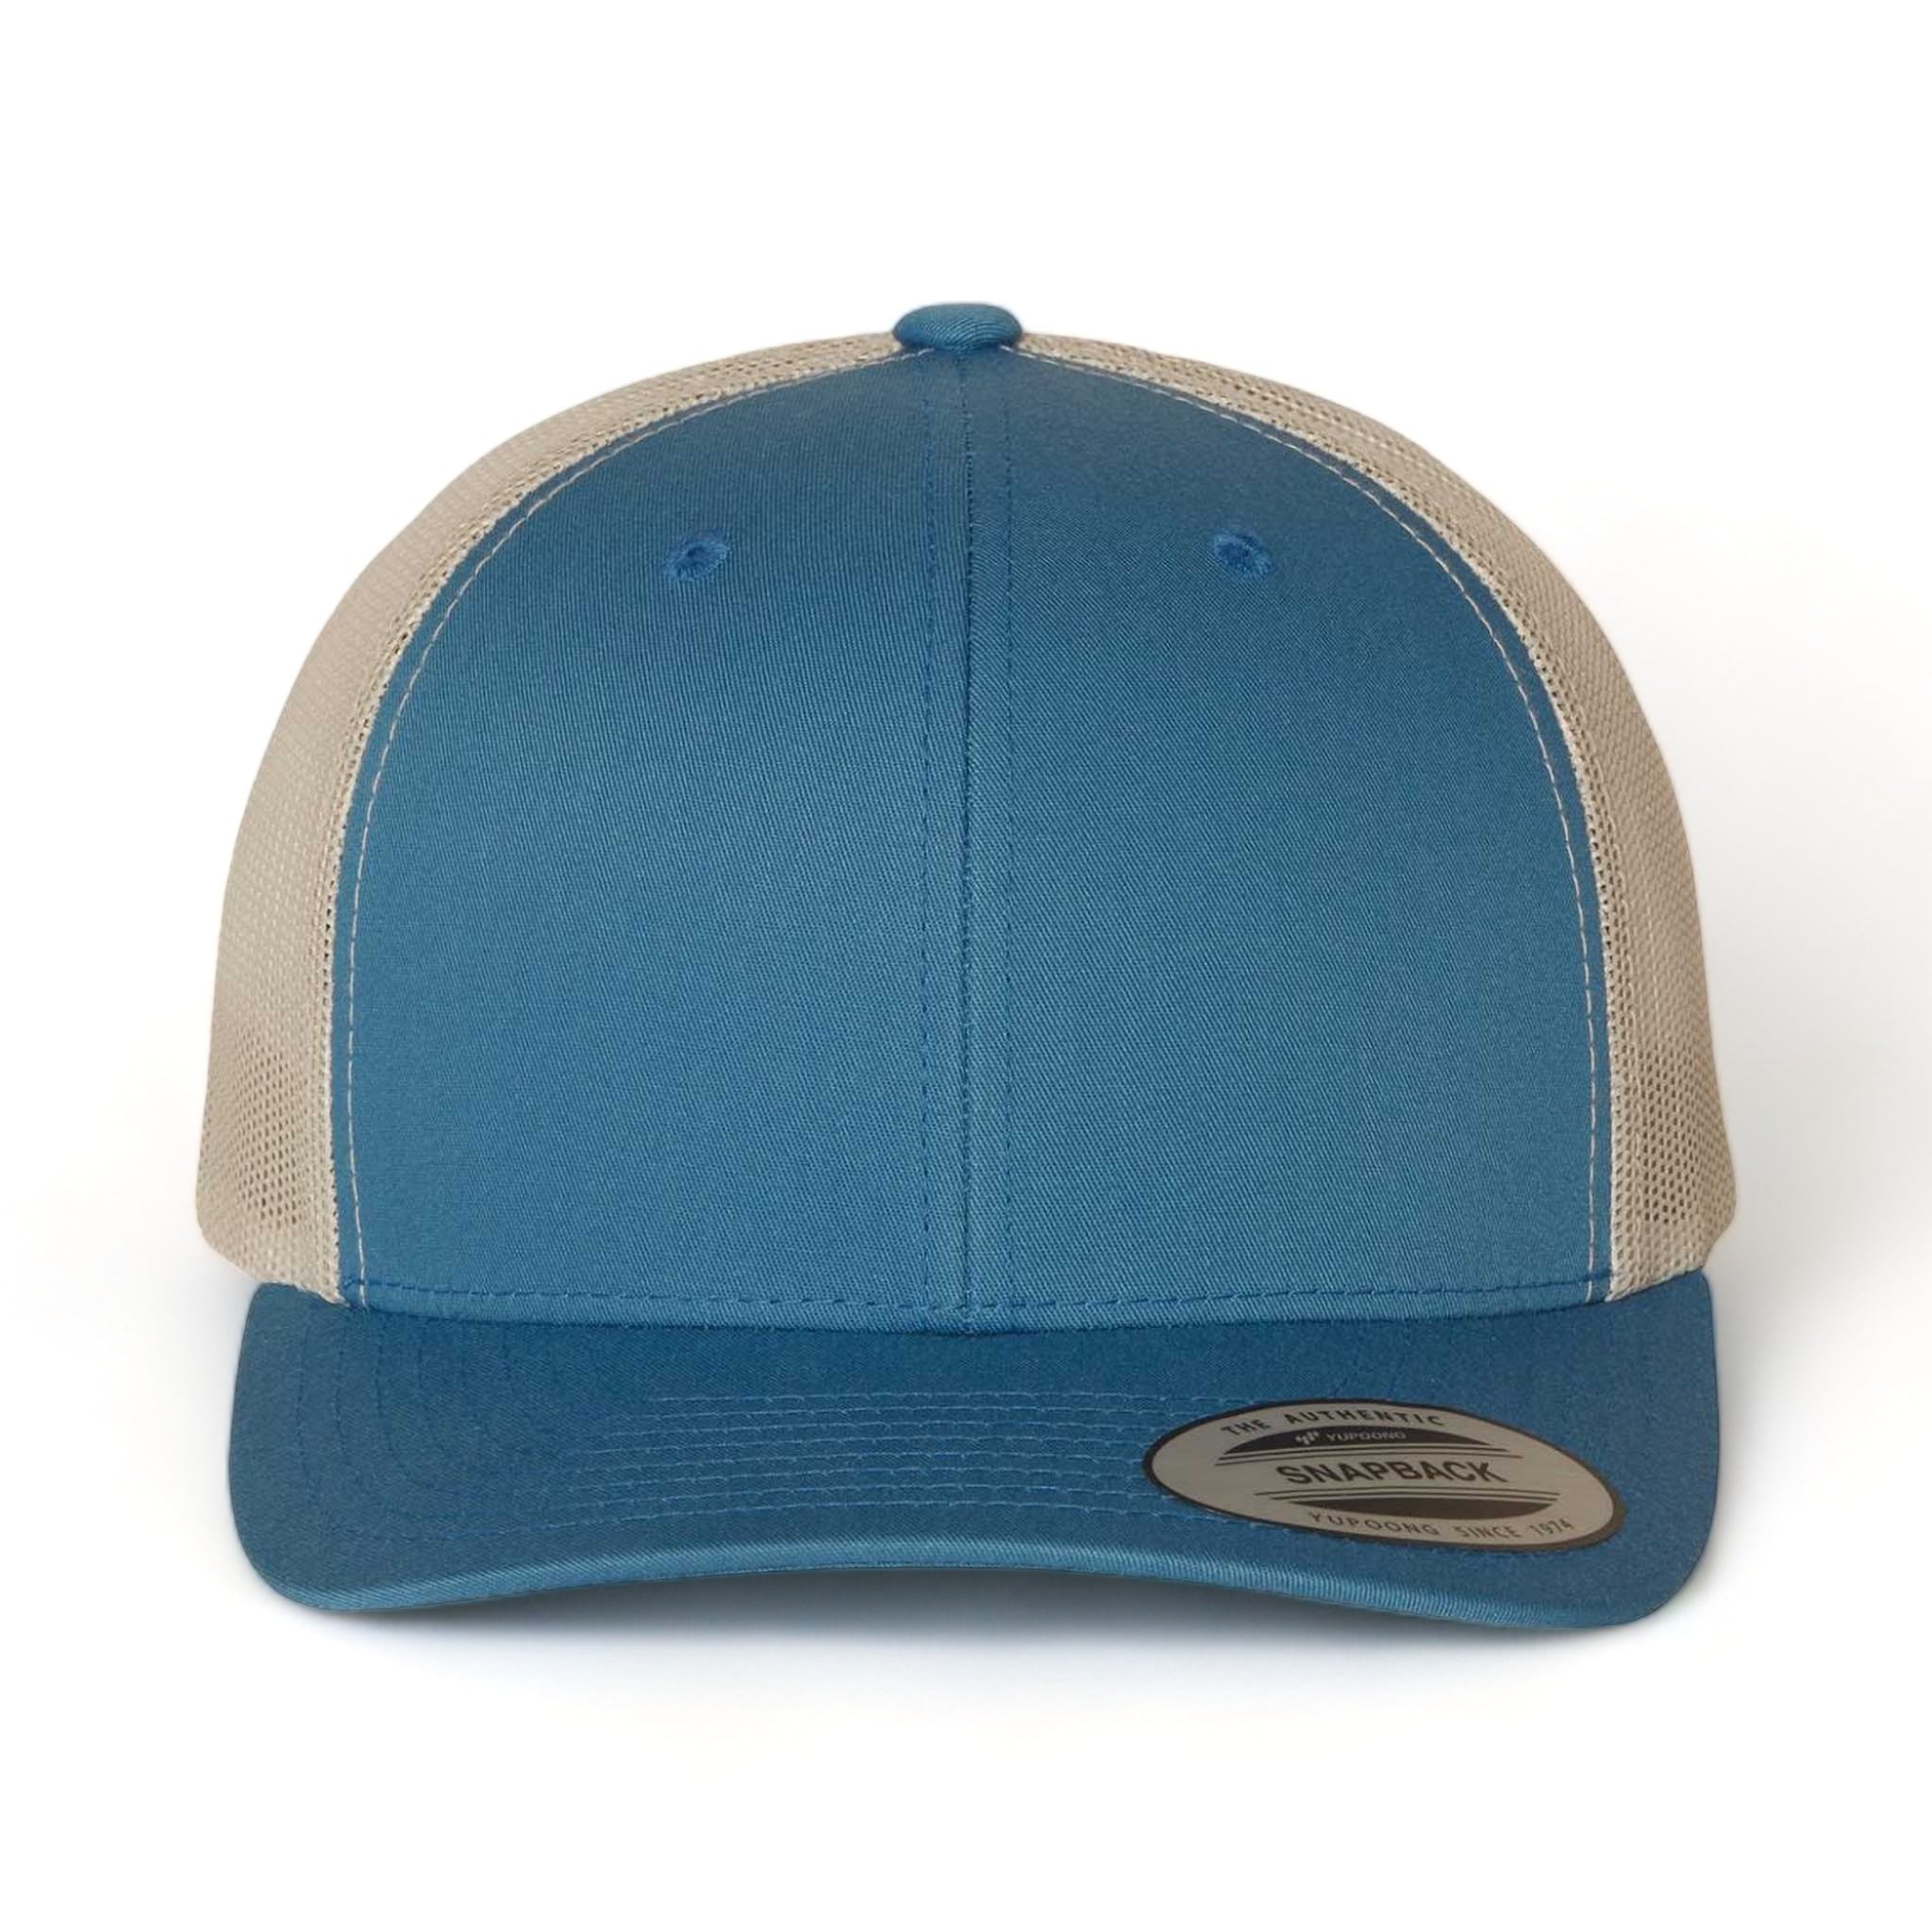 Front view of YP Classics 6606 custom hat in steel blue and silver